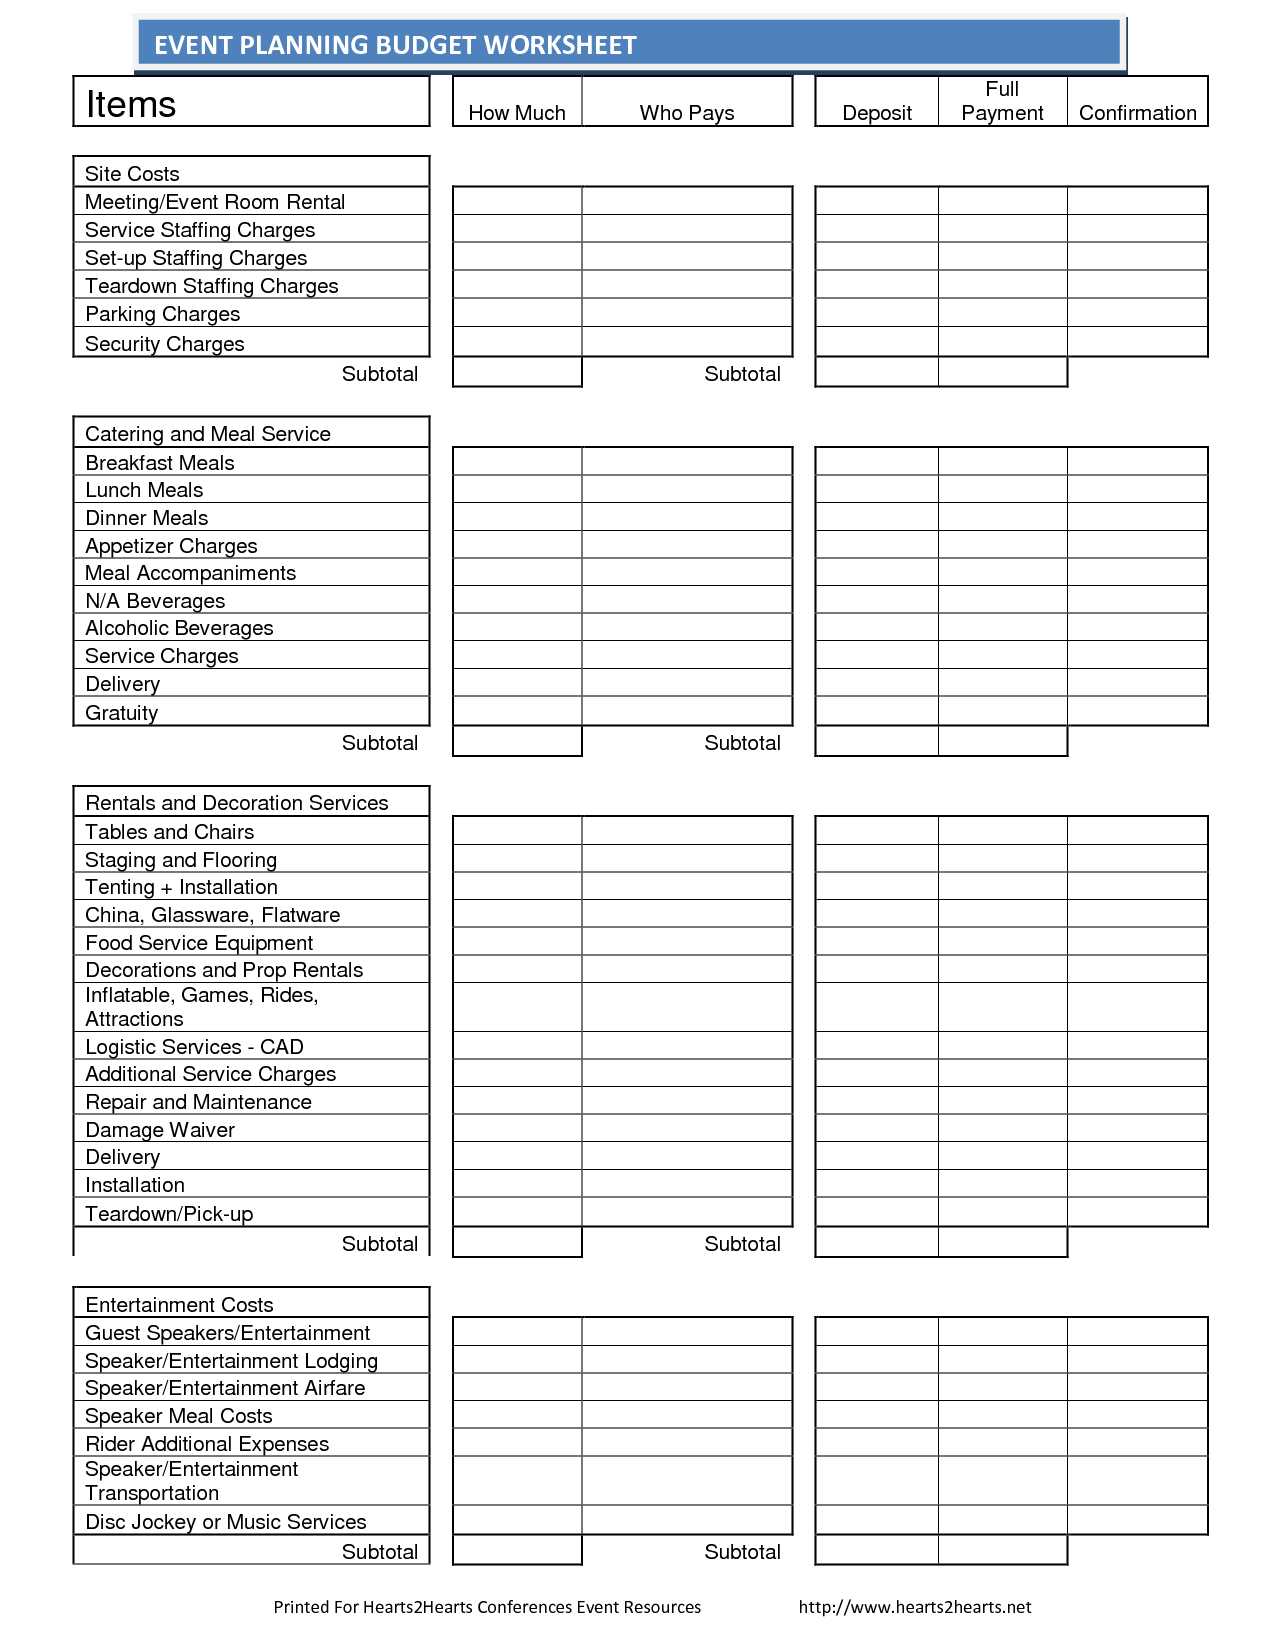 Downloadable Budget Worksheets or Bud Worksheet Template for events Google Search